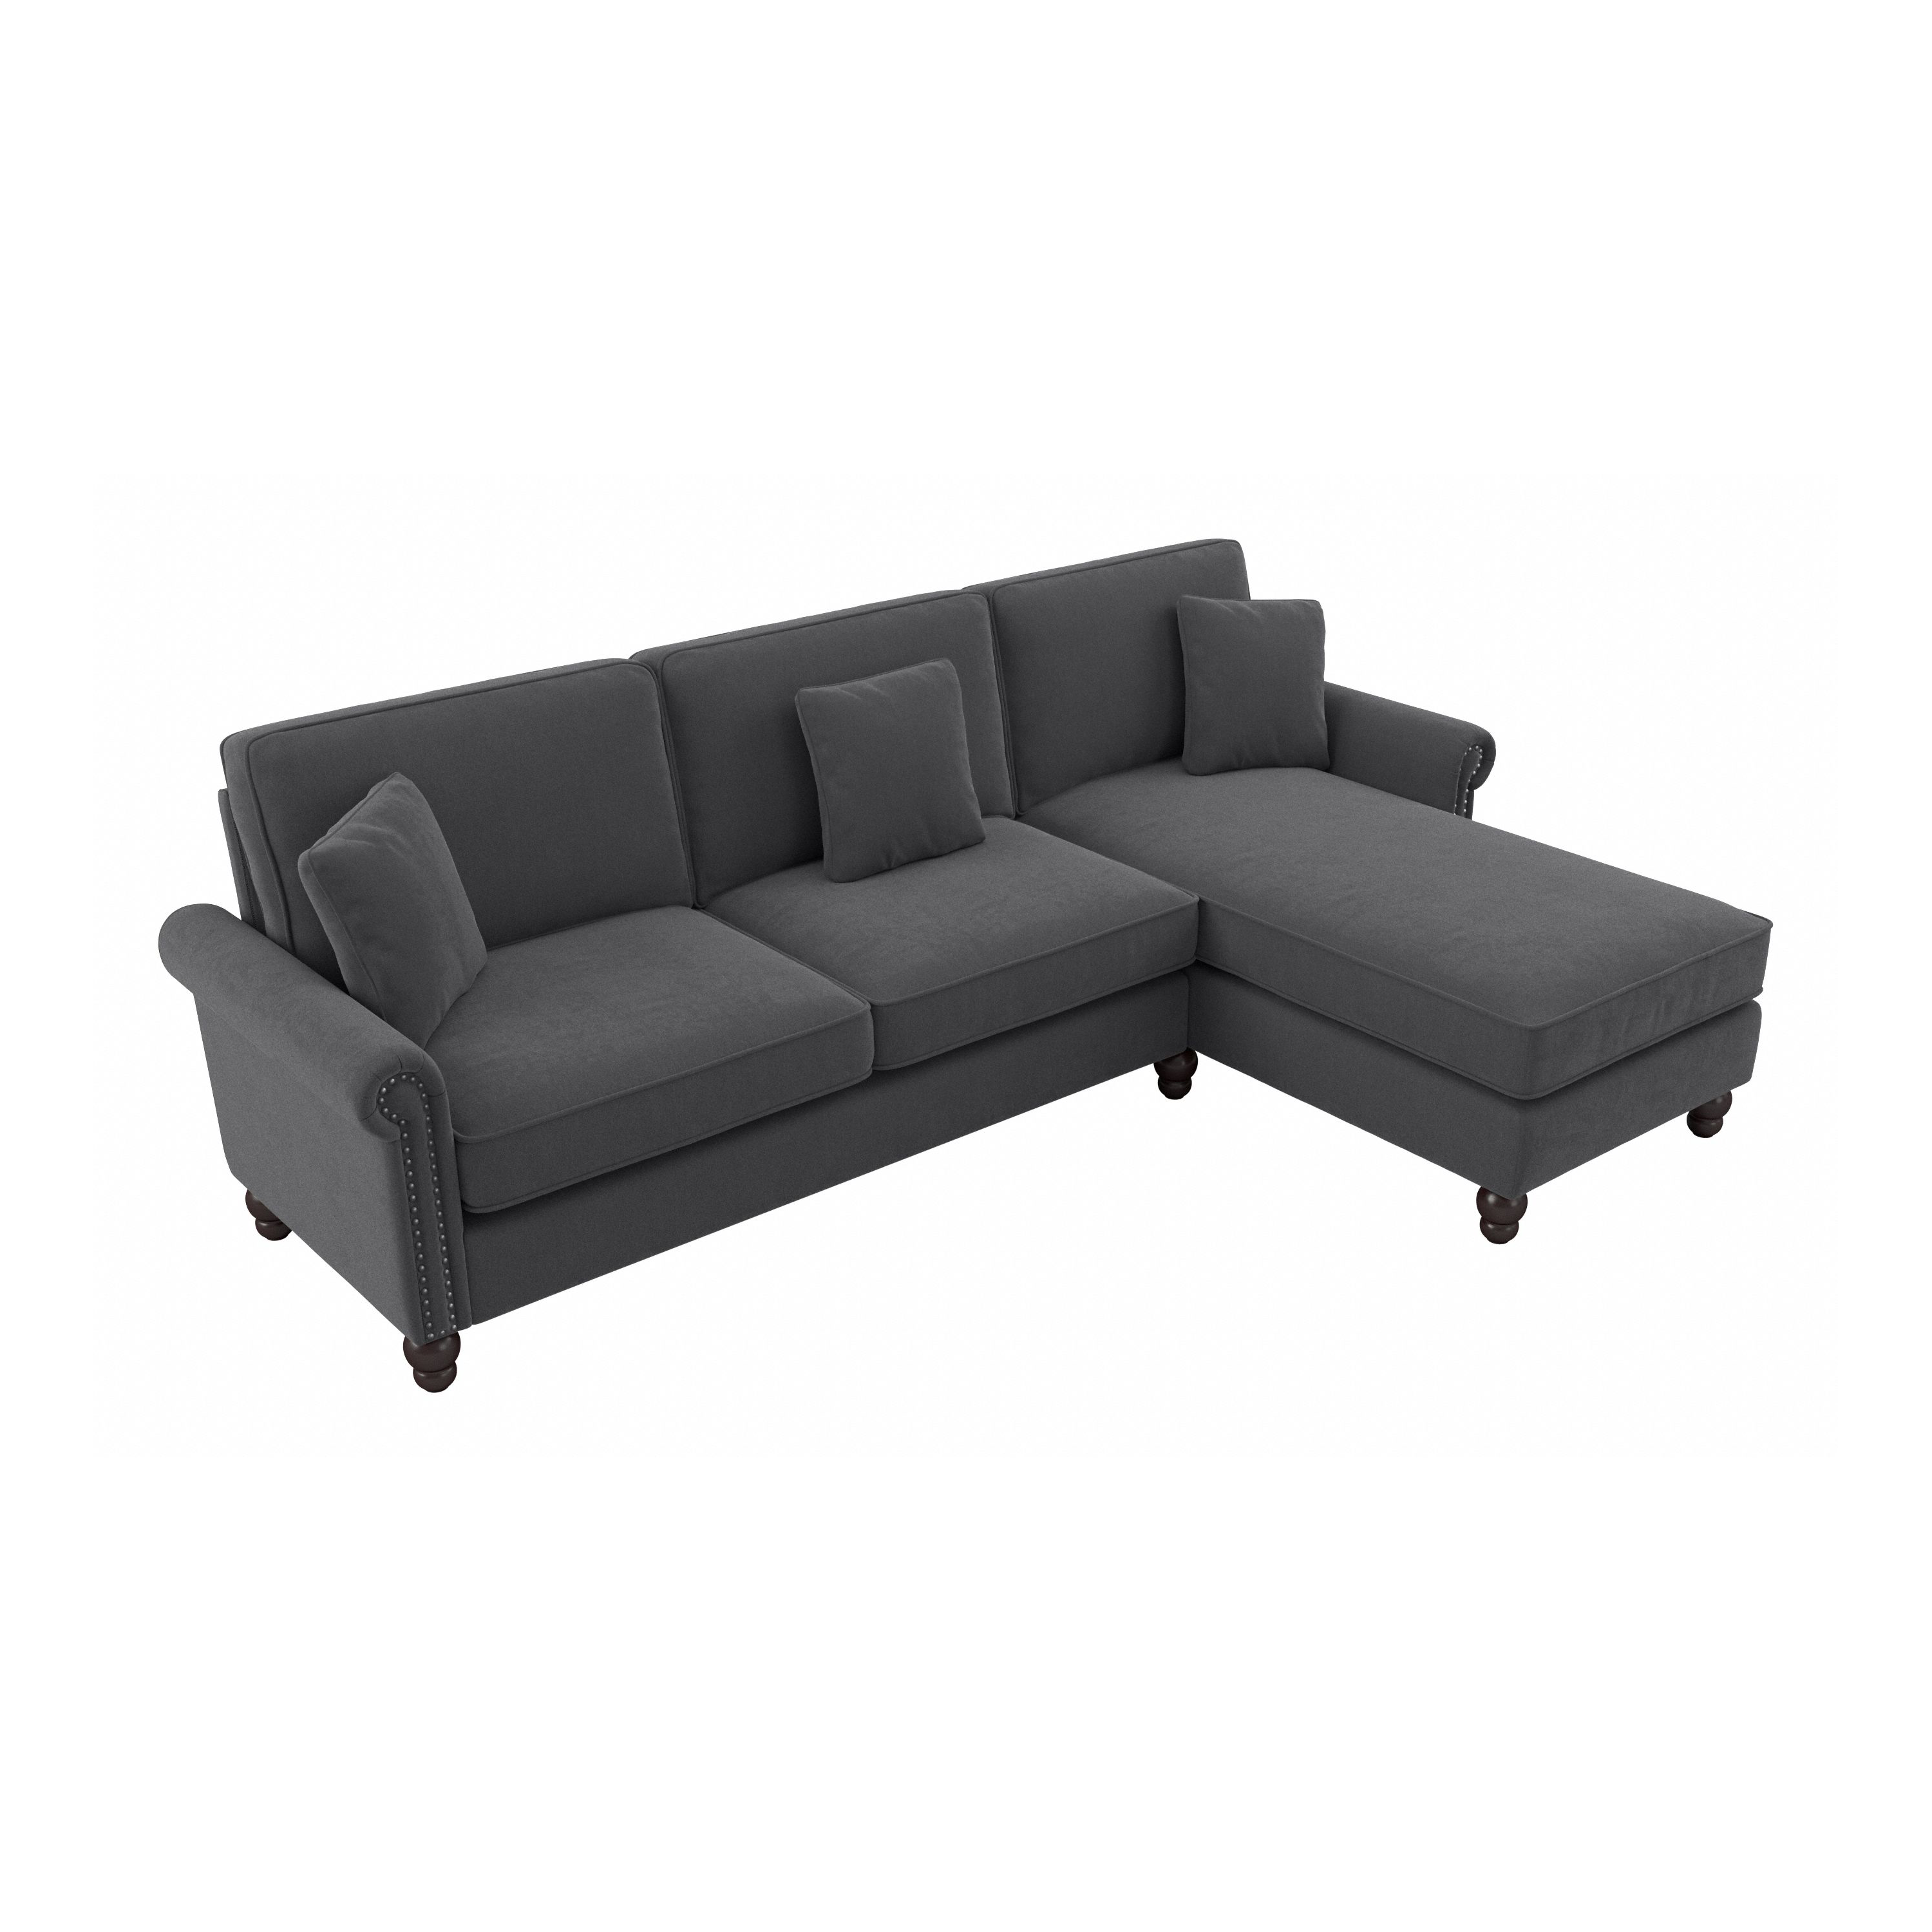 Shop Bush Furniture Coventry 102W Sectional Couch with Reversible Chaise Lounge 02 CVY102BCGH-03K #color_charcoal gray herringbone fabr